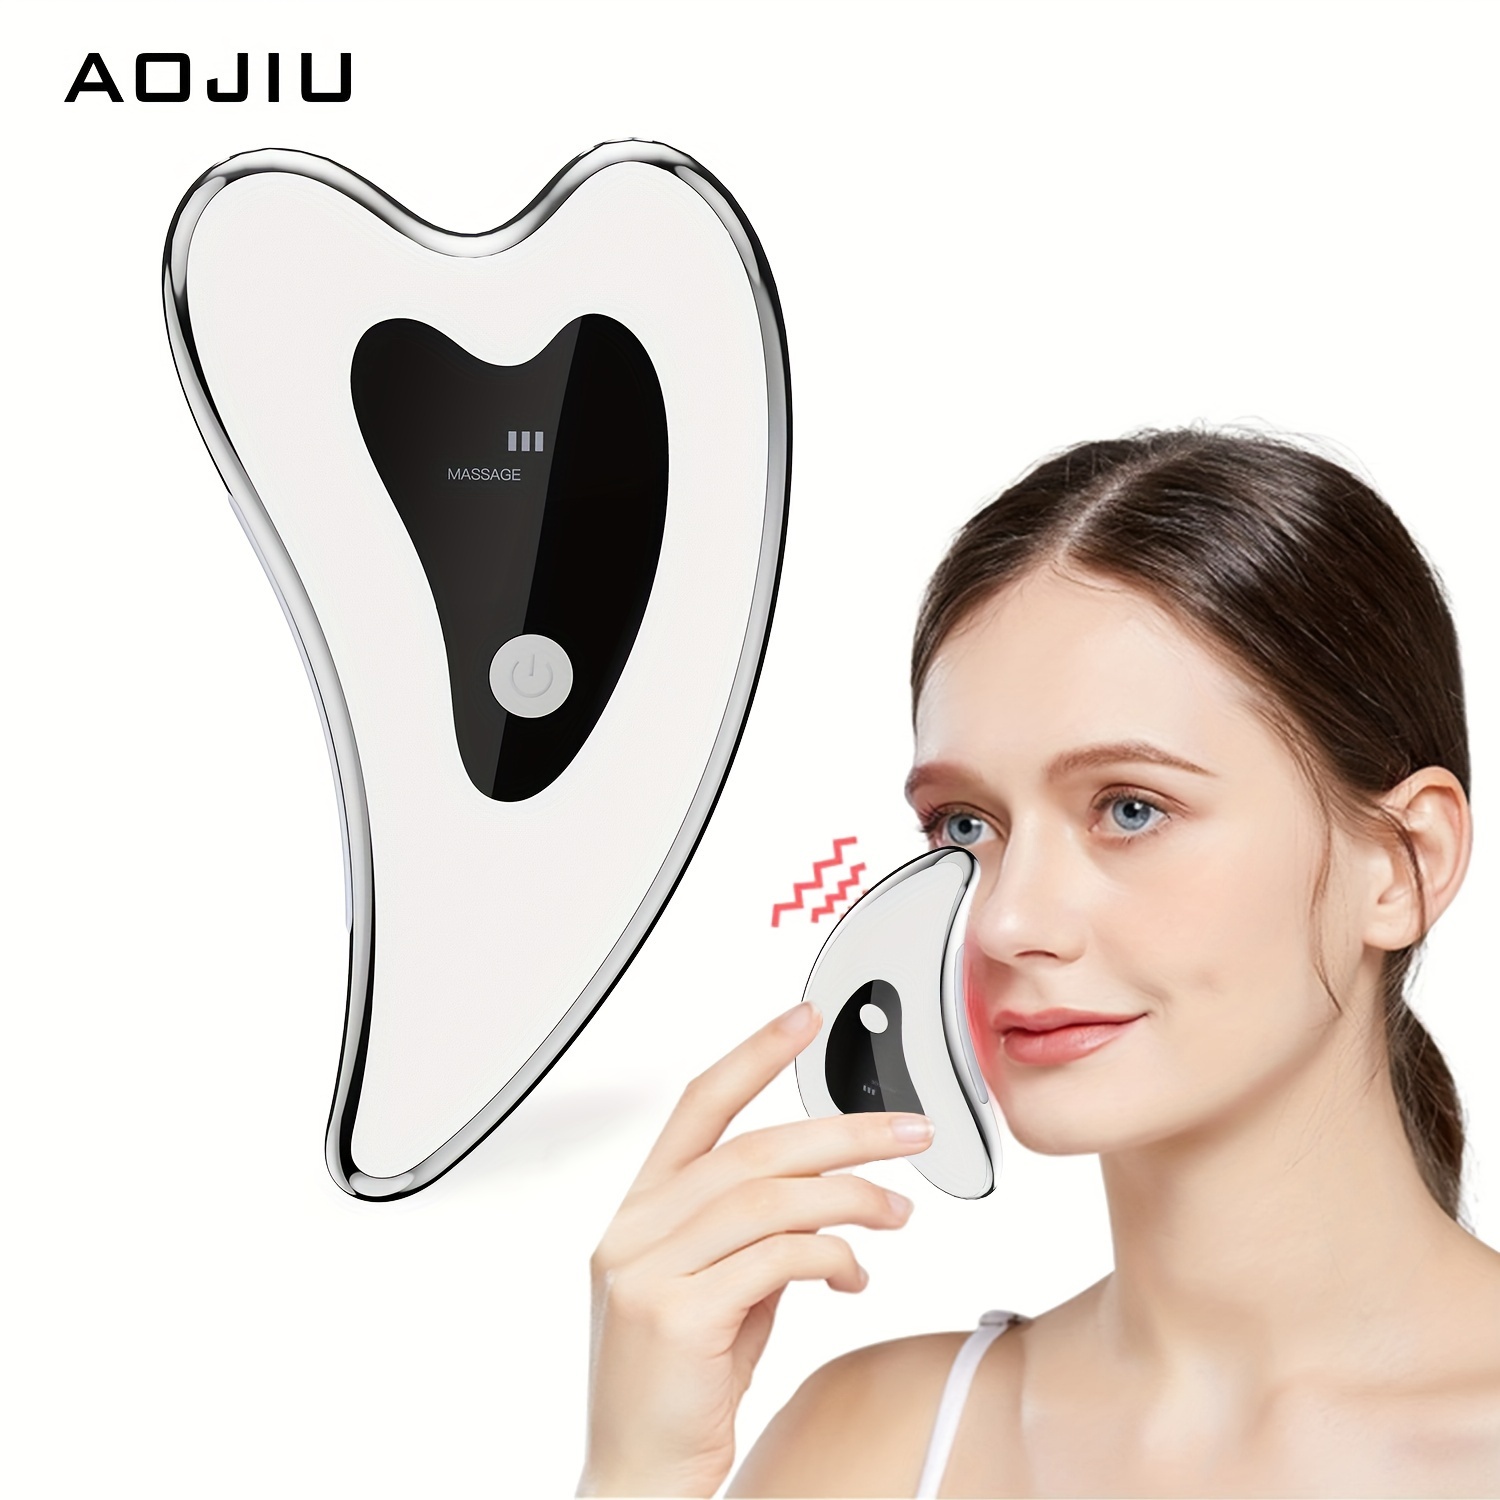 

Aojiu Portable Facial And Neck Care Tools, Electric Scraping Board, Facial Massager, Hot Compress Mode, Vibration Mode, Relaxing Skin, Home Spa Skin Care Massager, Gift For Girls!